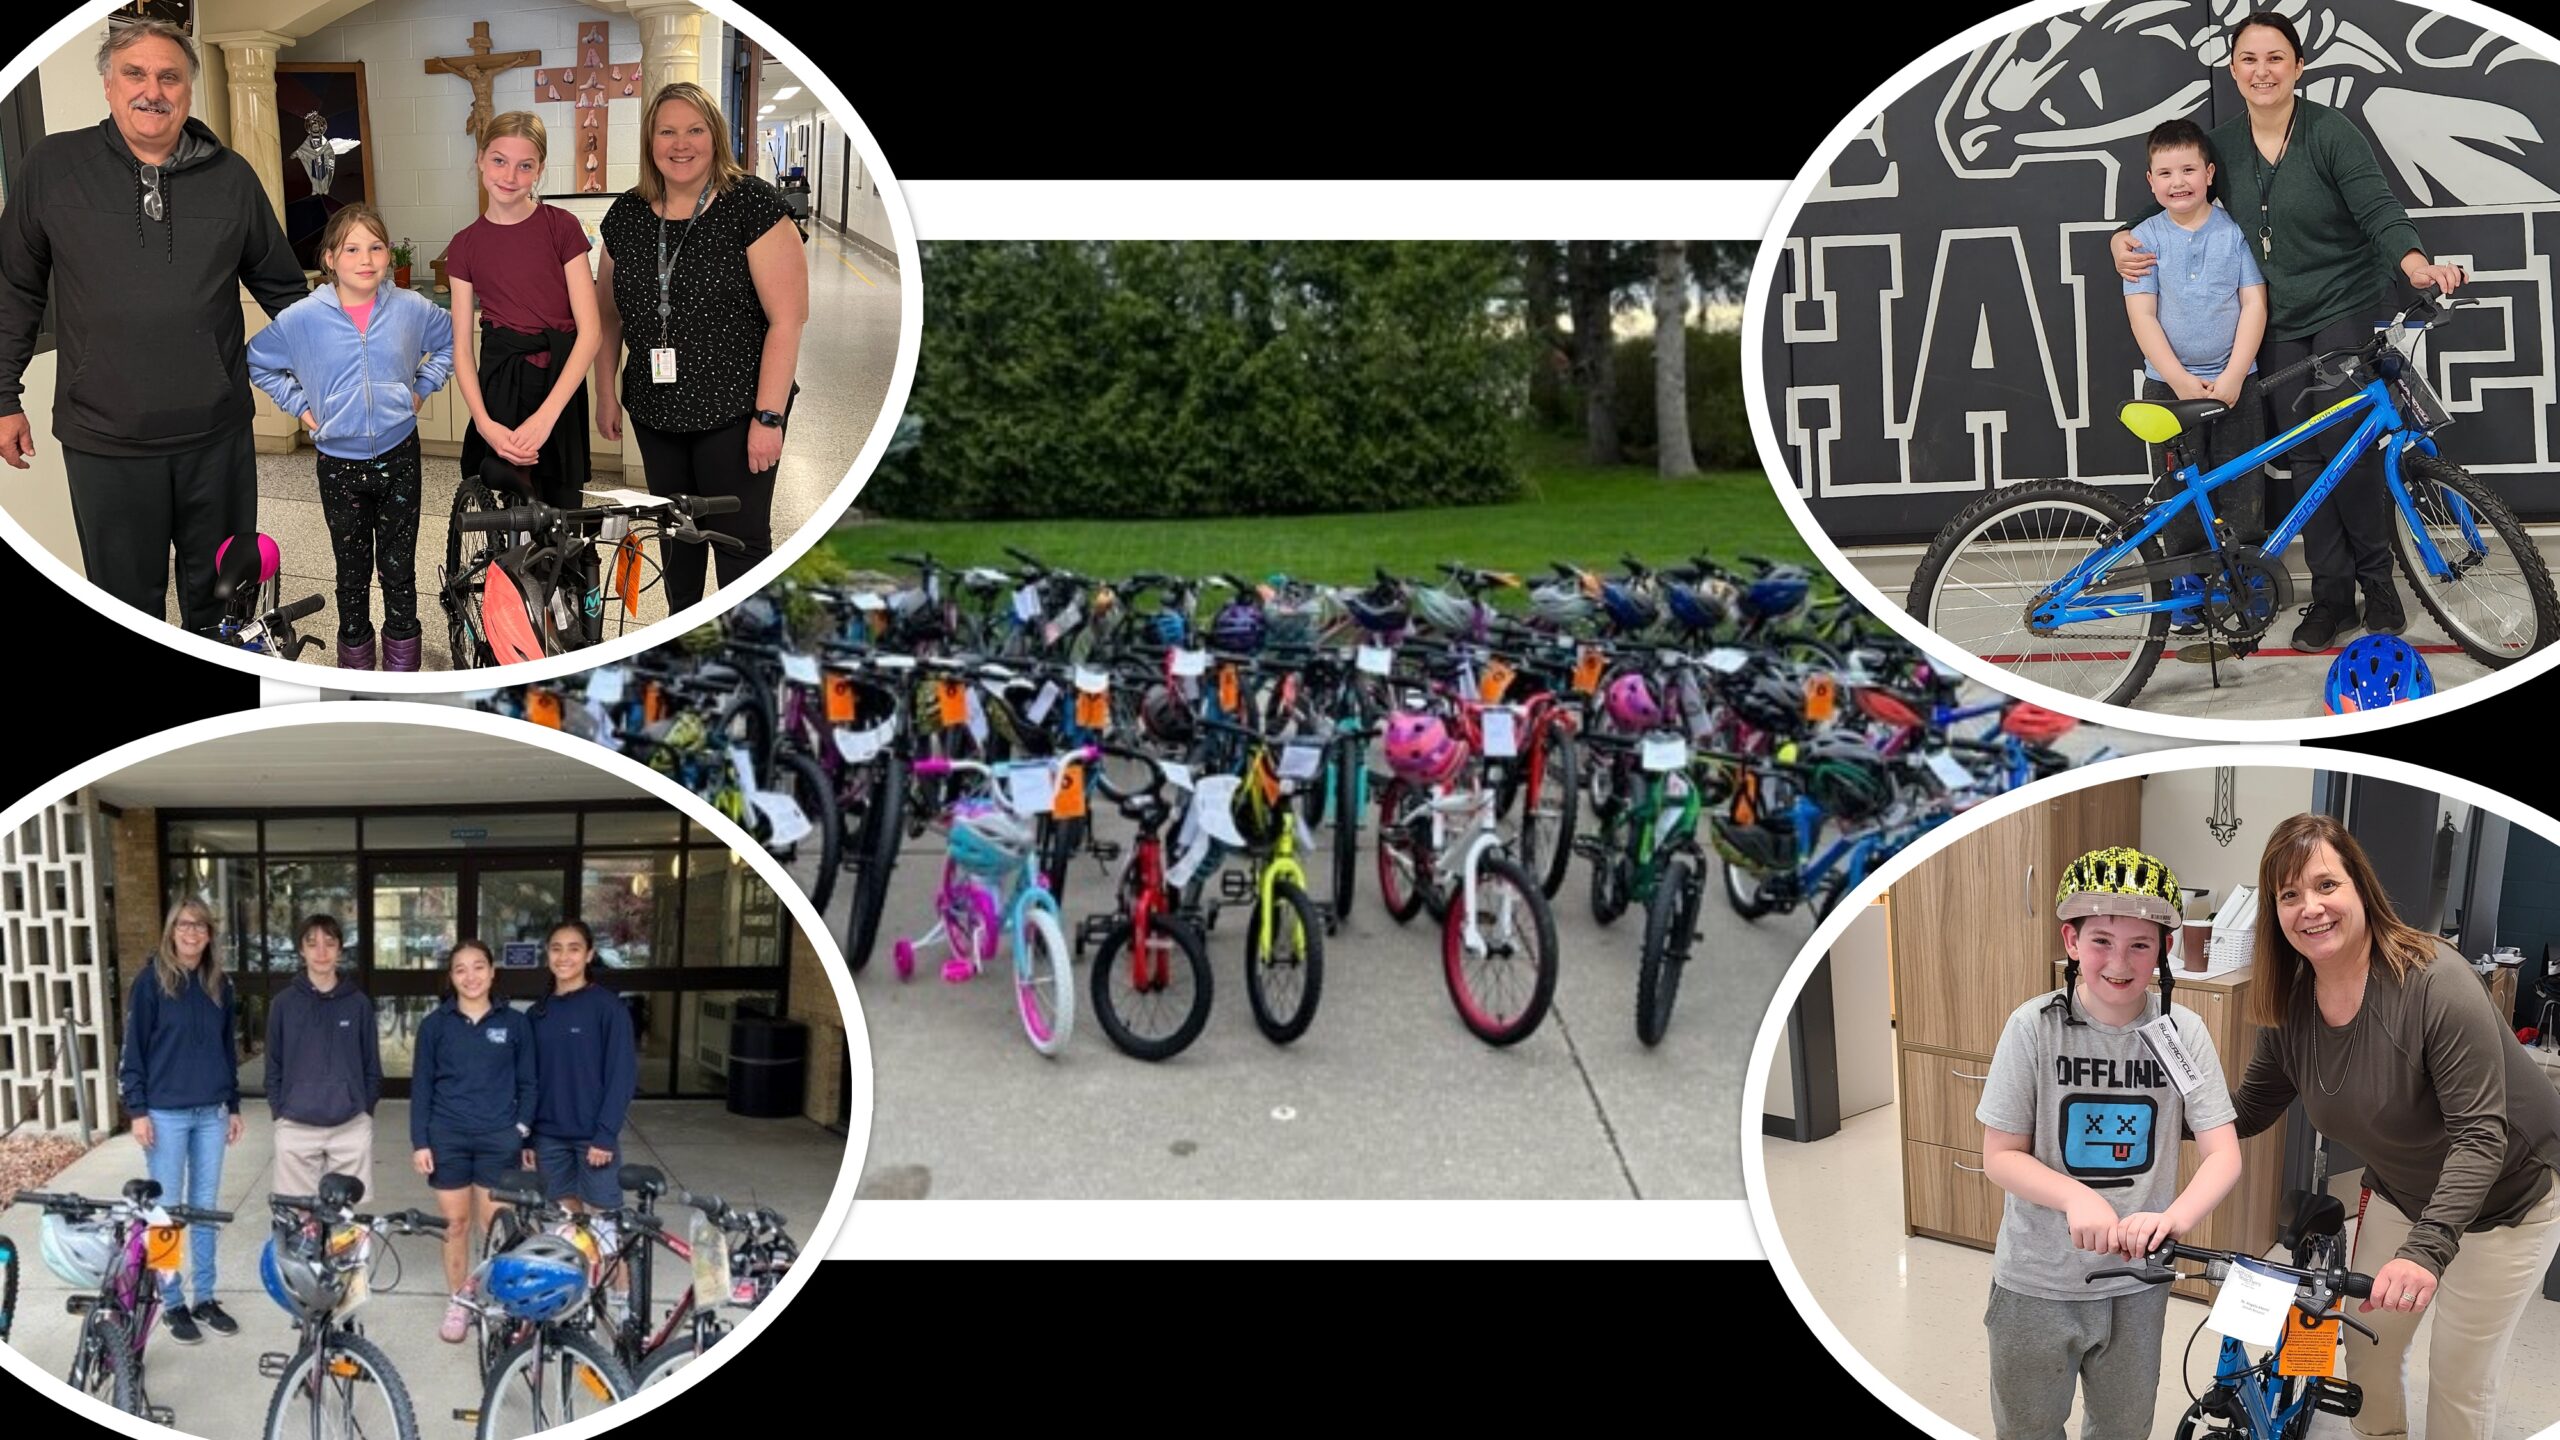 Catholic Teachers’ Association Raises Nearly $9,000 to Purchase Bikes and Helmets for Deserving Students Across the District